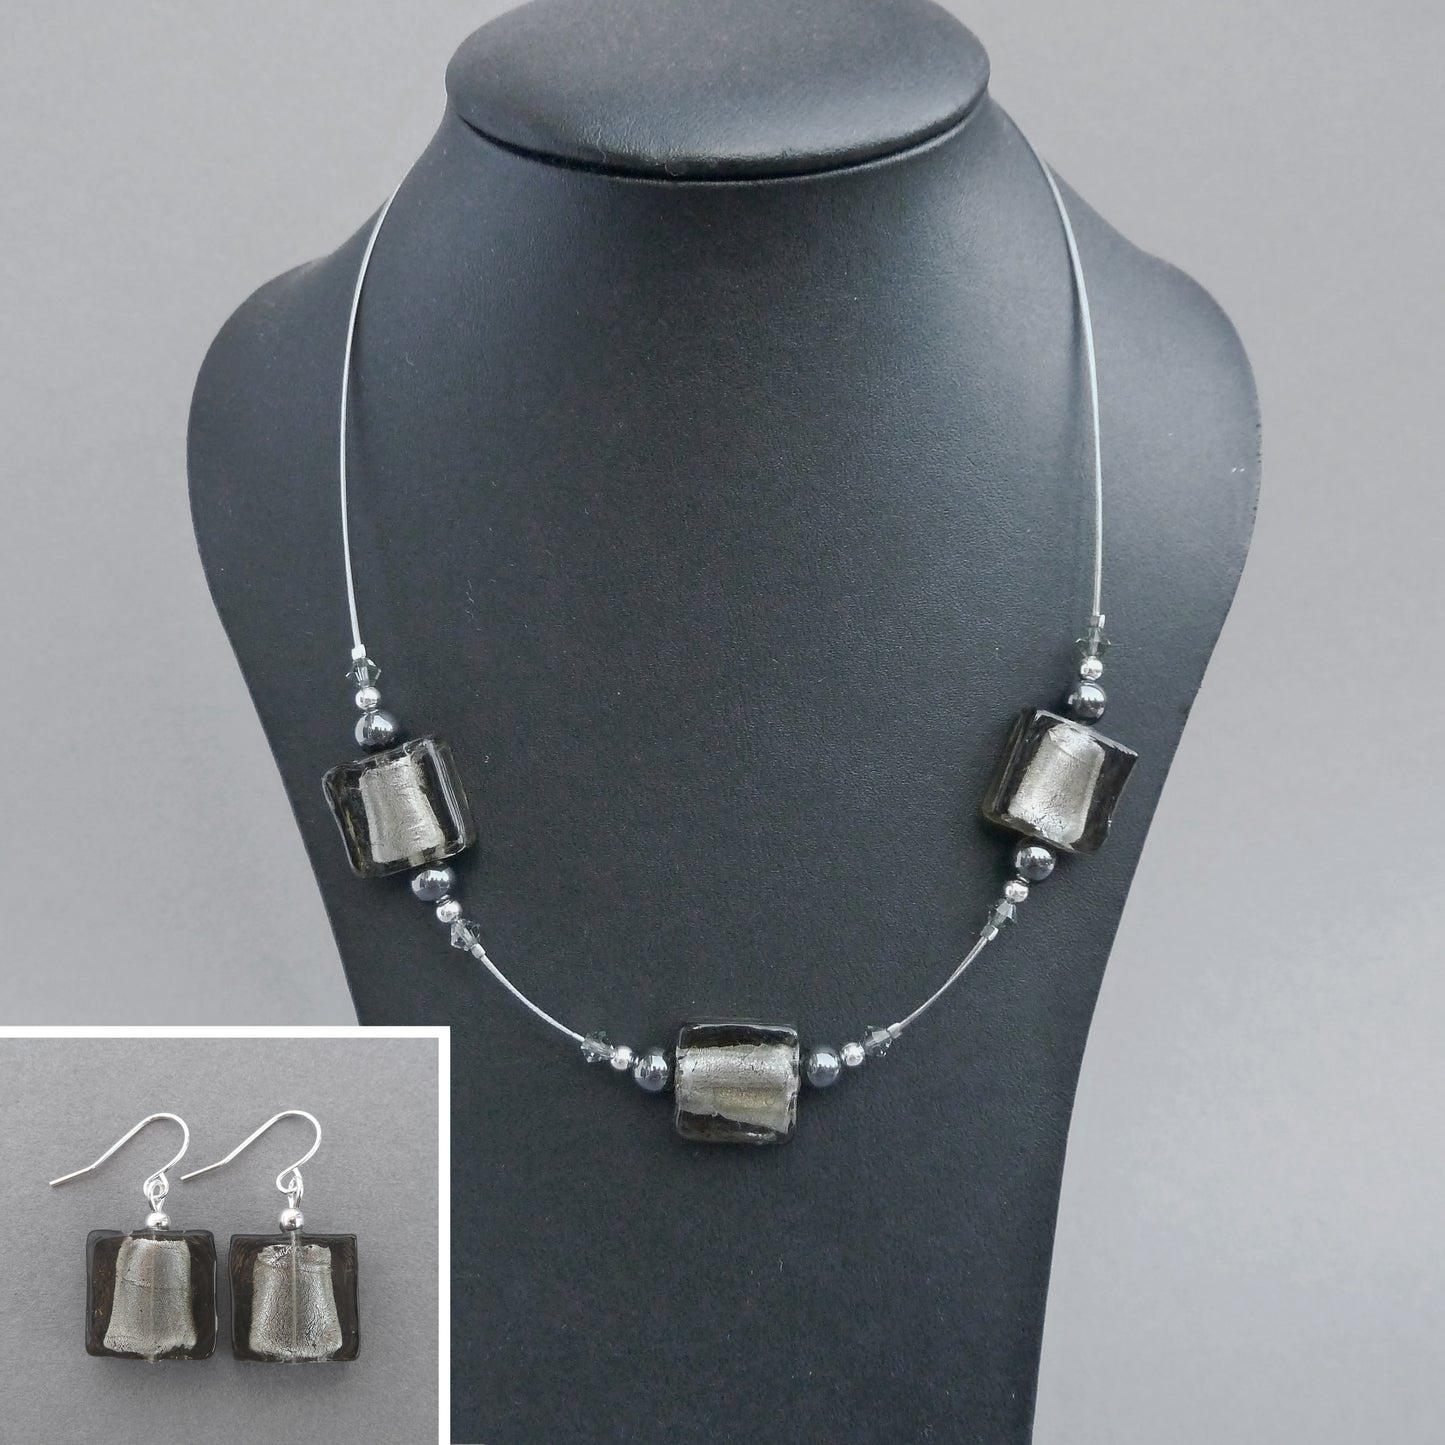 Grey fused glass necklace and earrings set